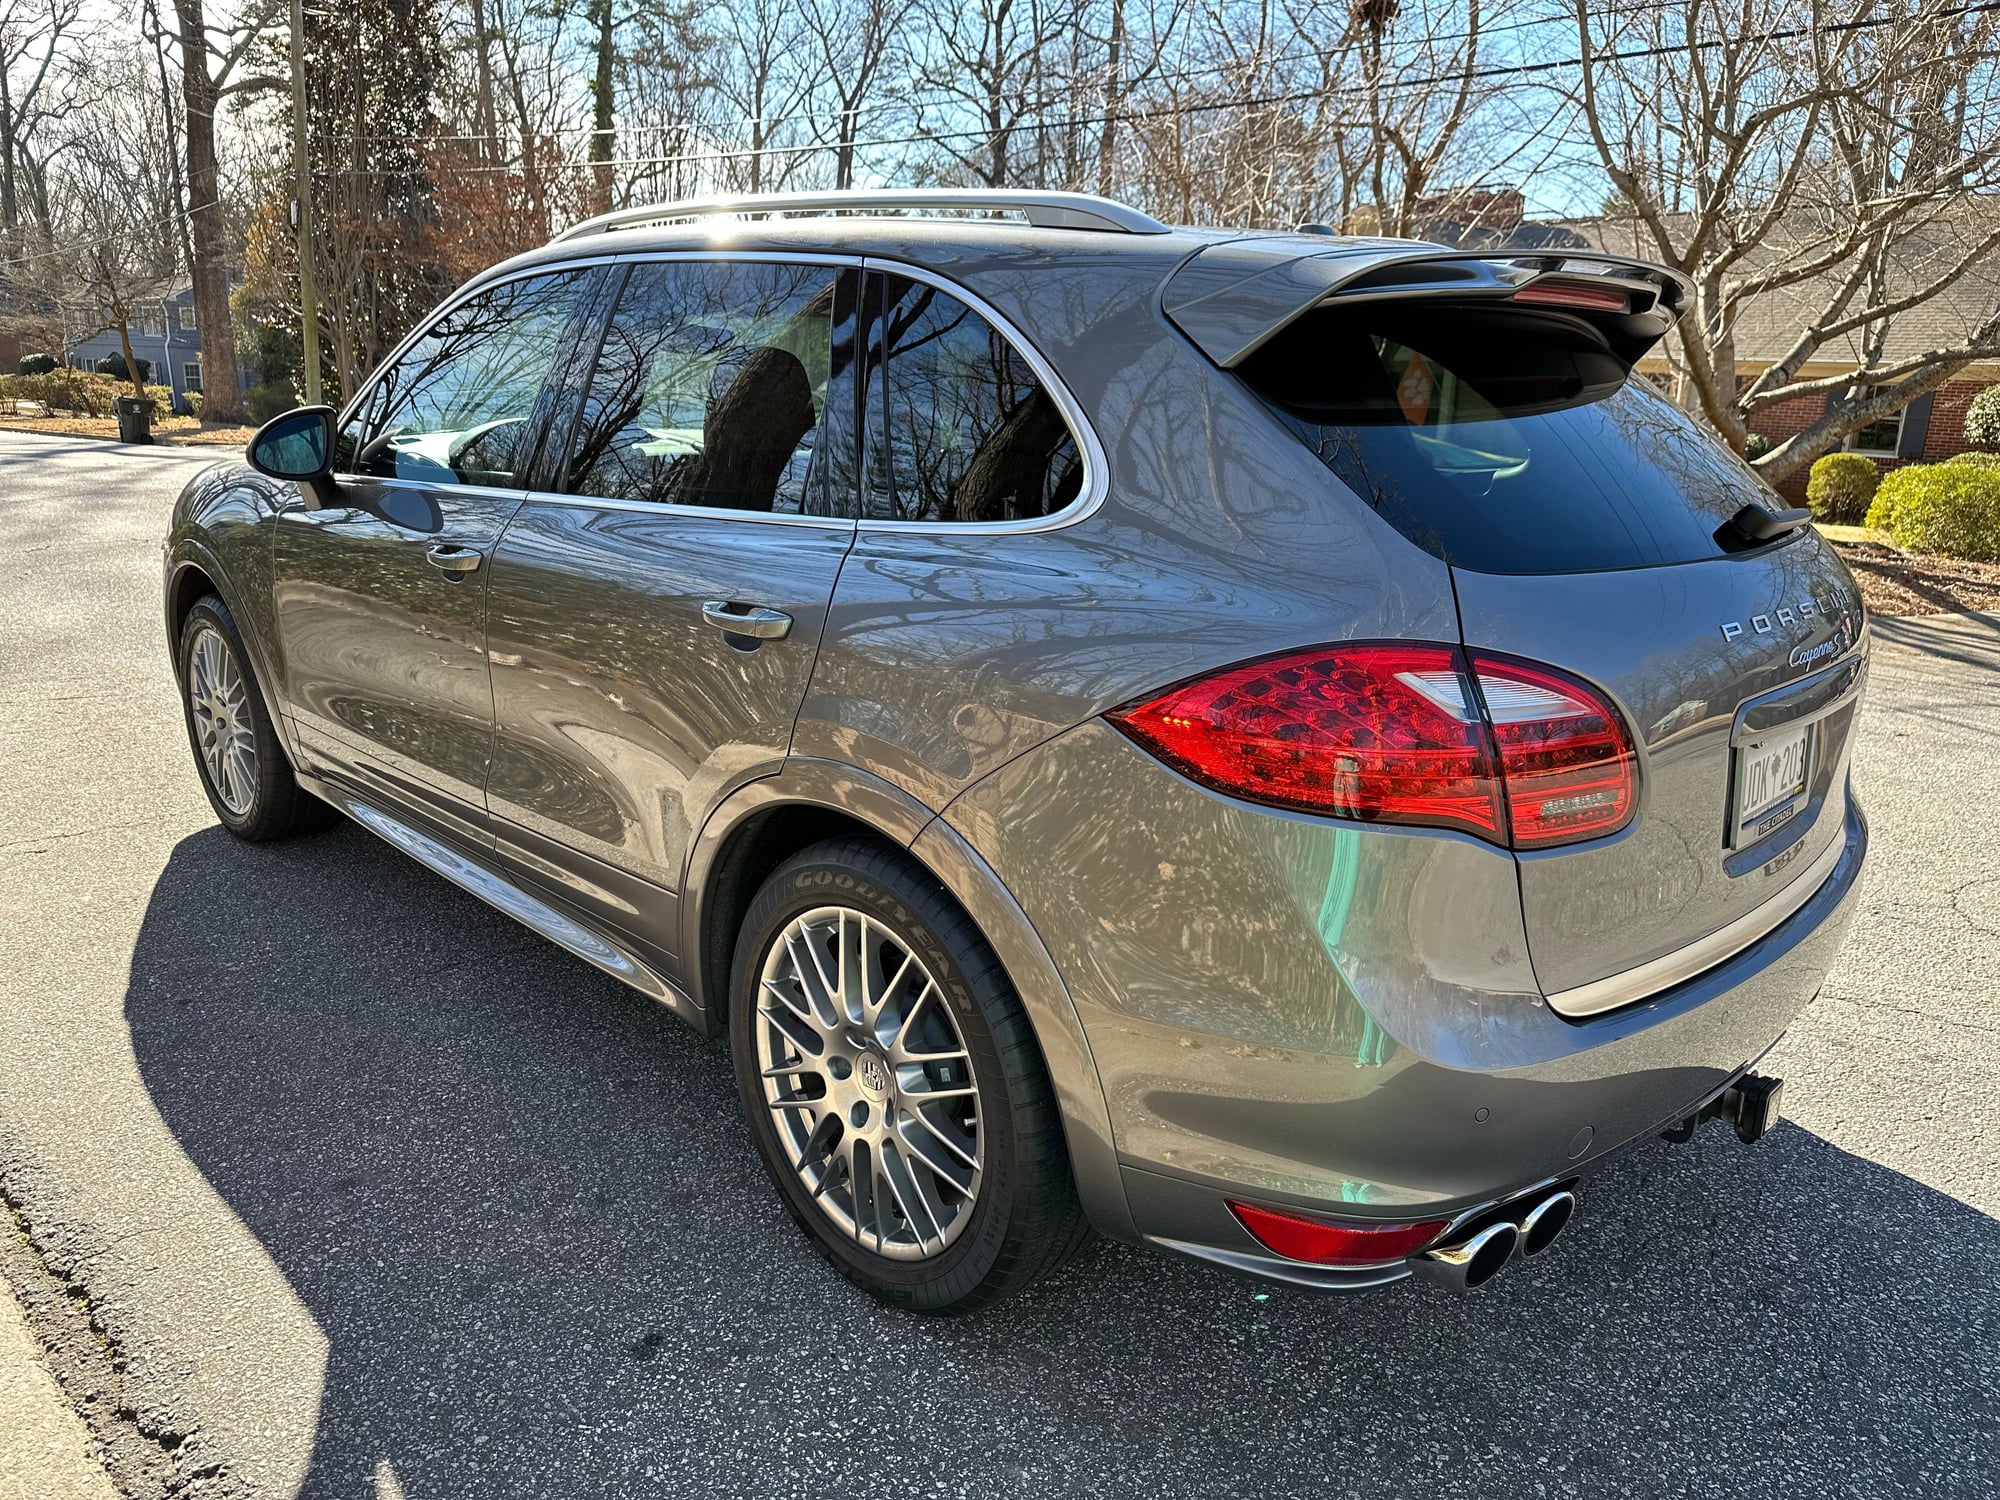 2013 Porsche Cayenne - 2013 Cayenne S 75k miles RARE locking diff - Used - VIN WP1AB2A28DLA81956 - 75,500 Miles - 8 cyl - 4WD - Automatic - SUV - Gray - Greenville, SC 29609, United States